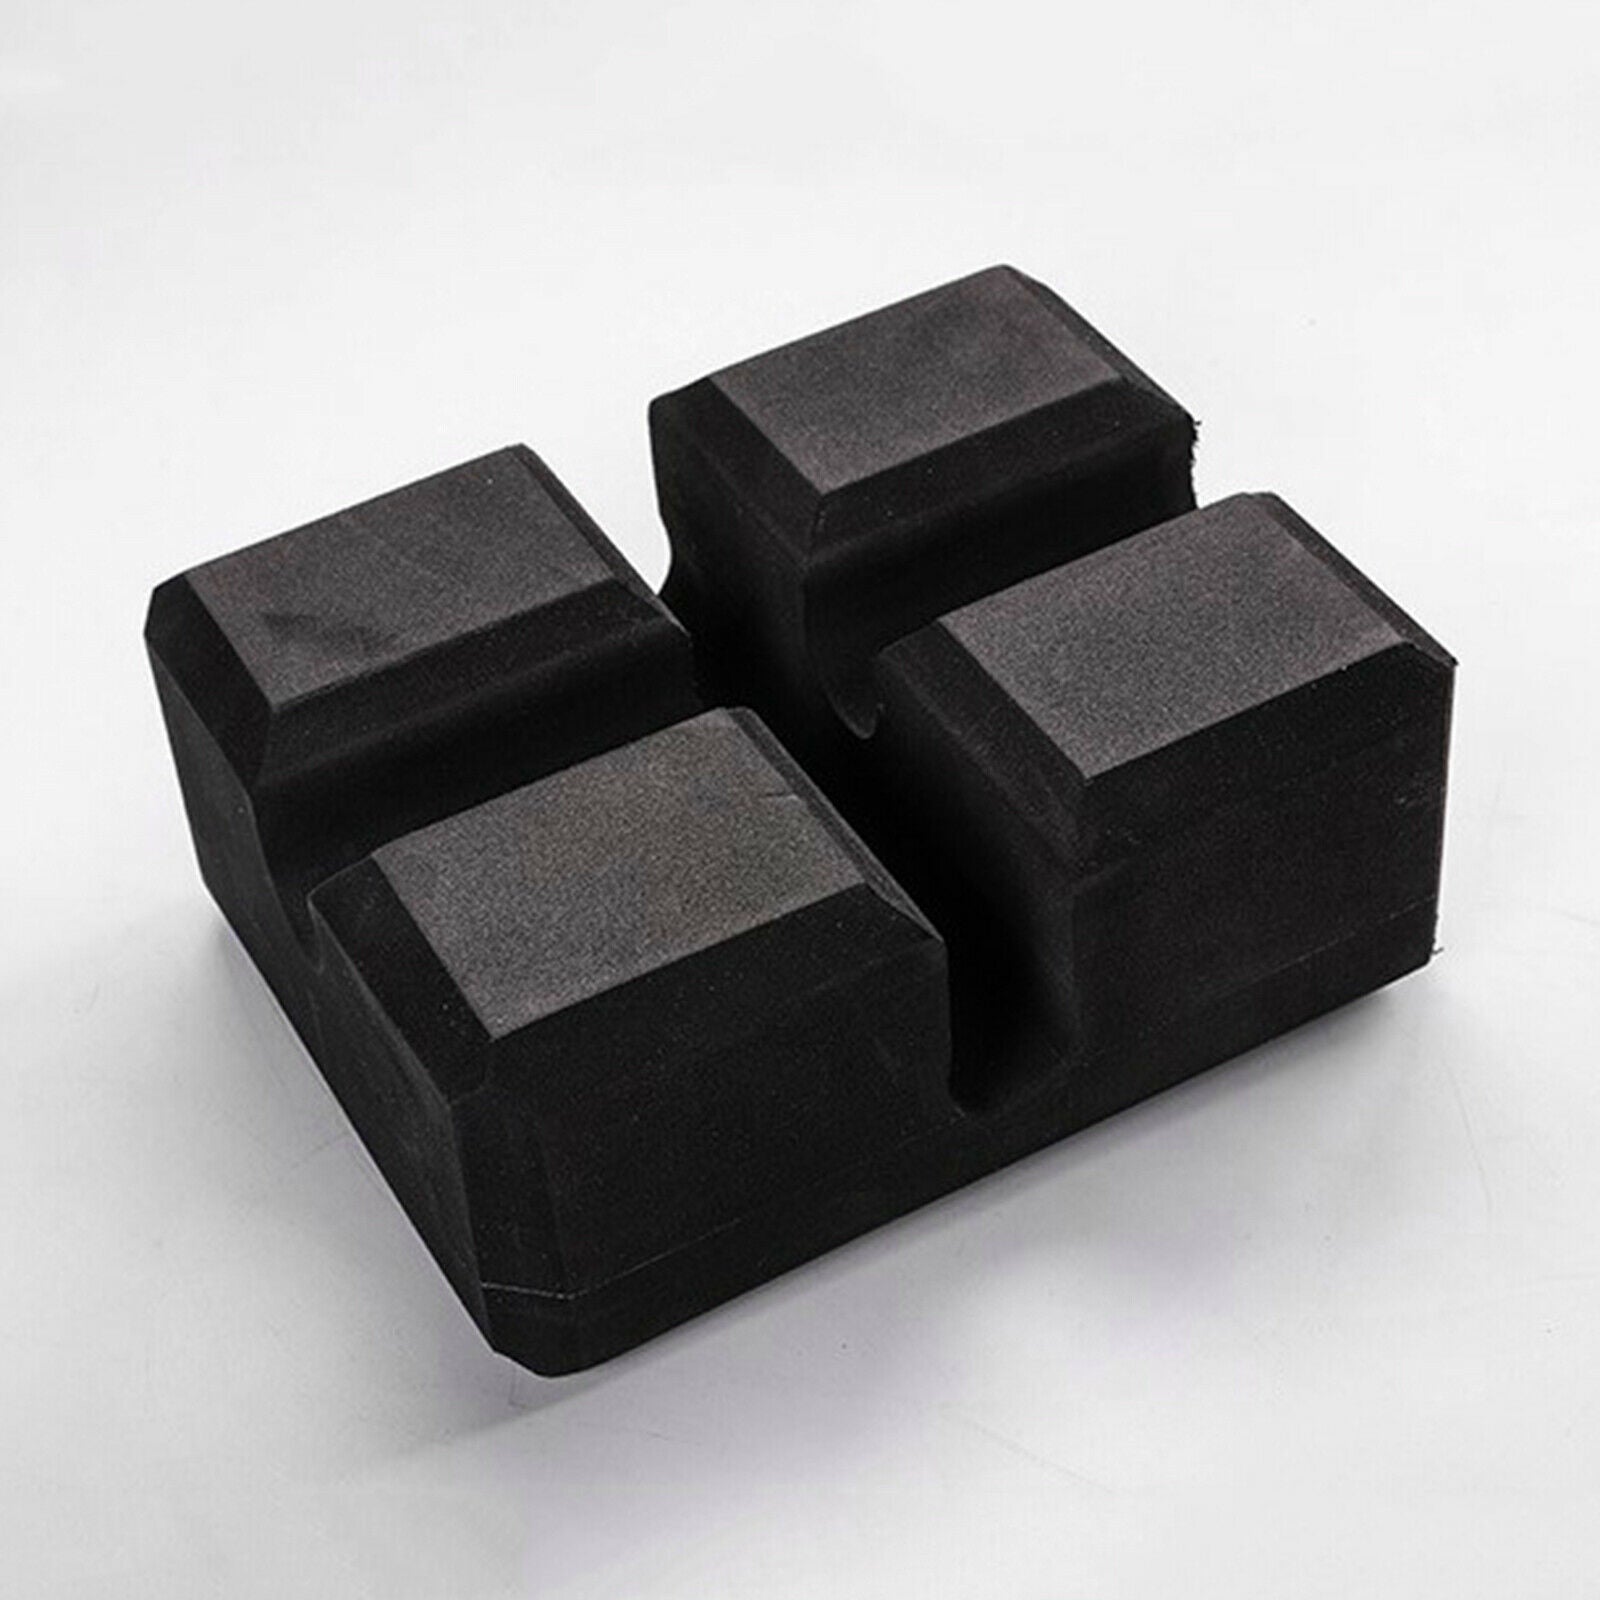 Bench Press Block Home Olympic Bar Foam Pad Forearm Toning Trainer Aids